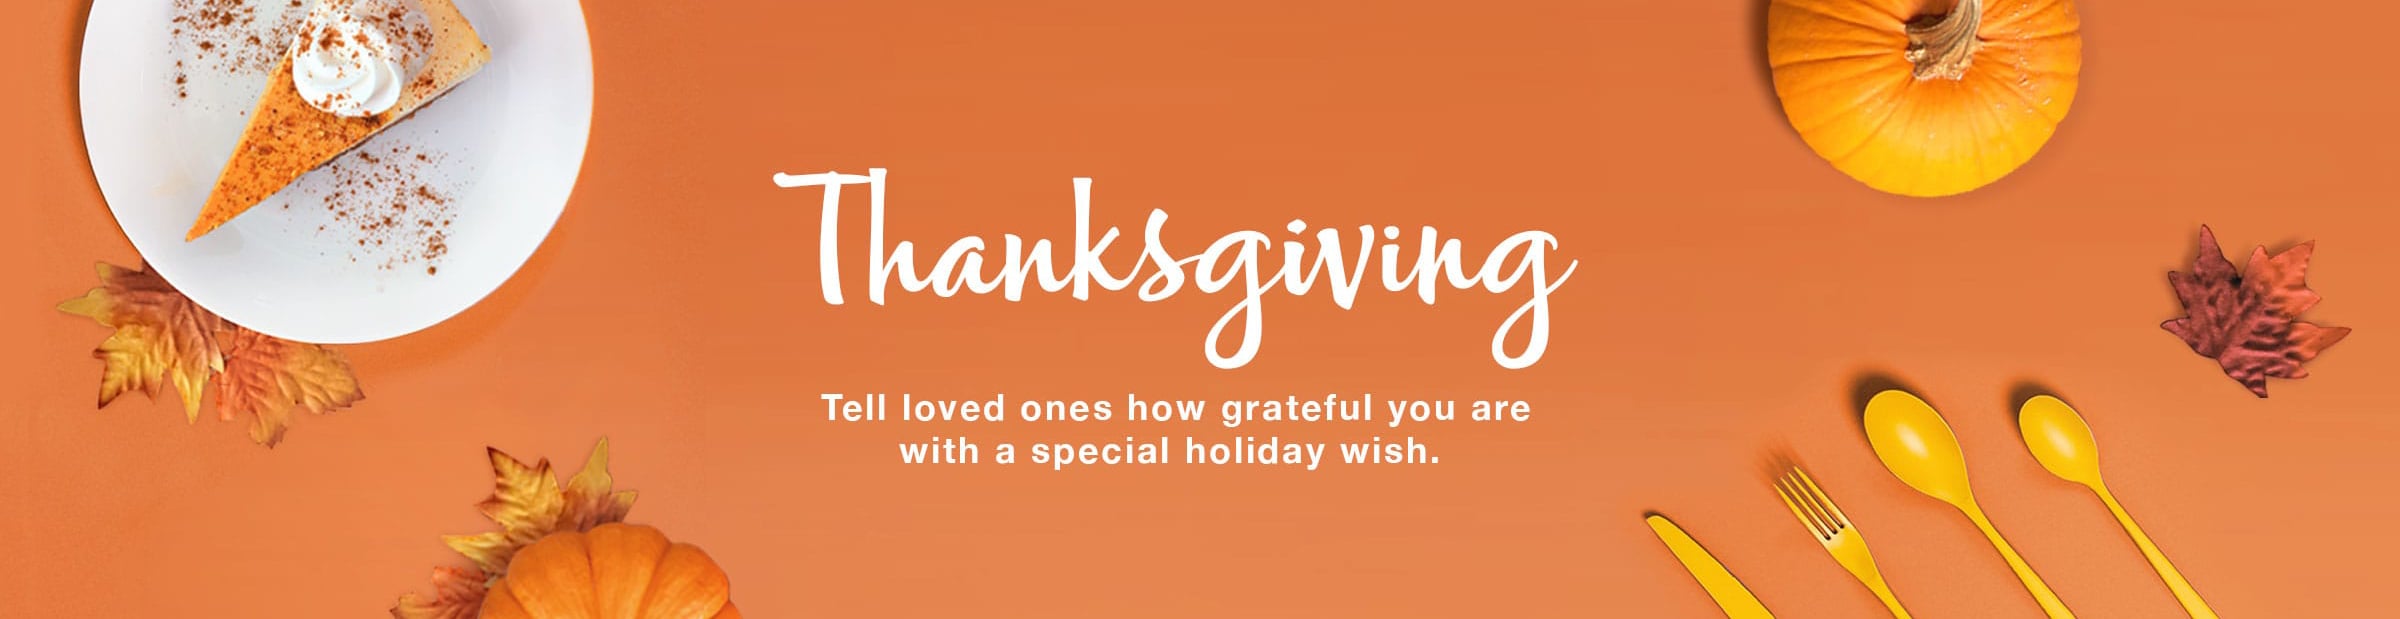 Thanksgiving setting with leaves, pumpkins, pumpkin pies, and silverware. Tell loved ones how grateful you are with a special holiday wish.